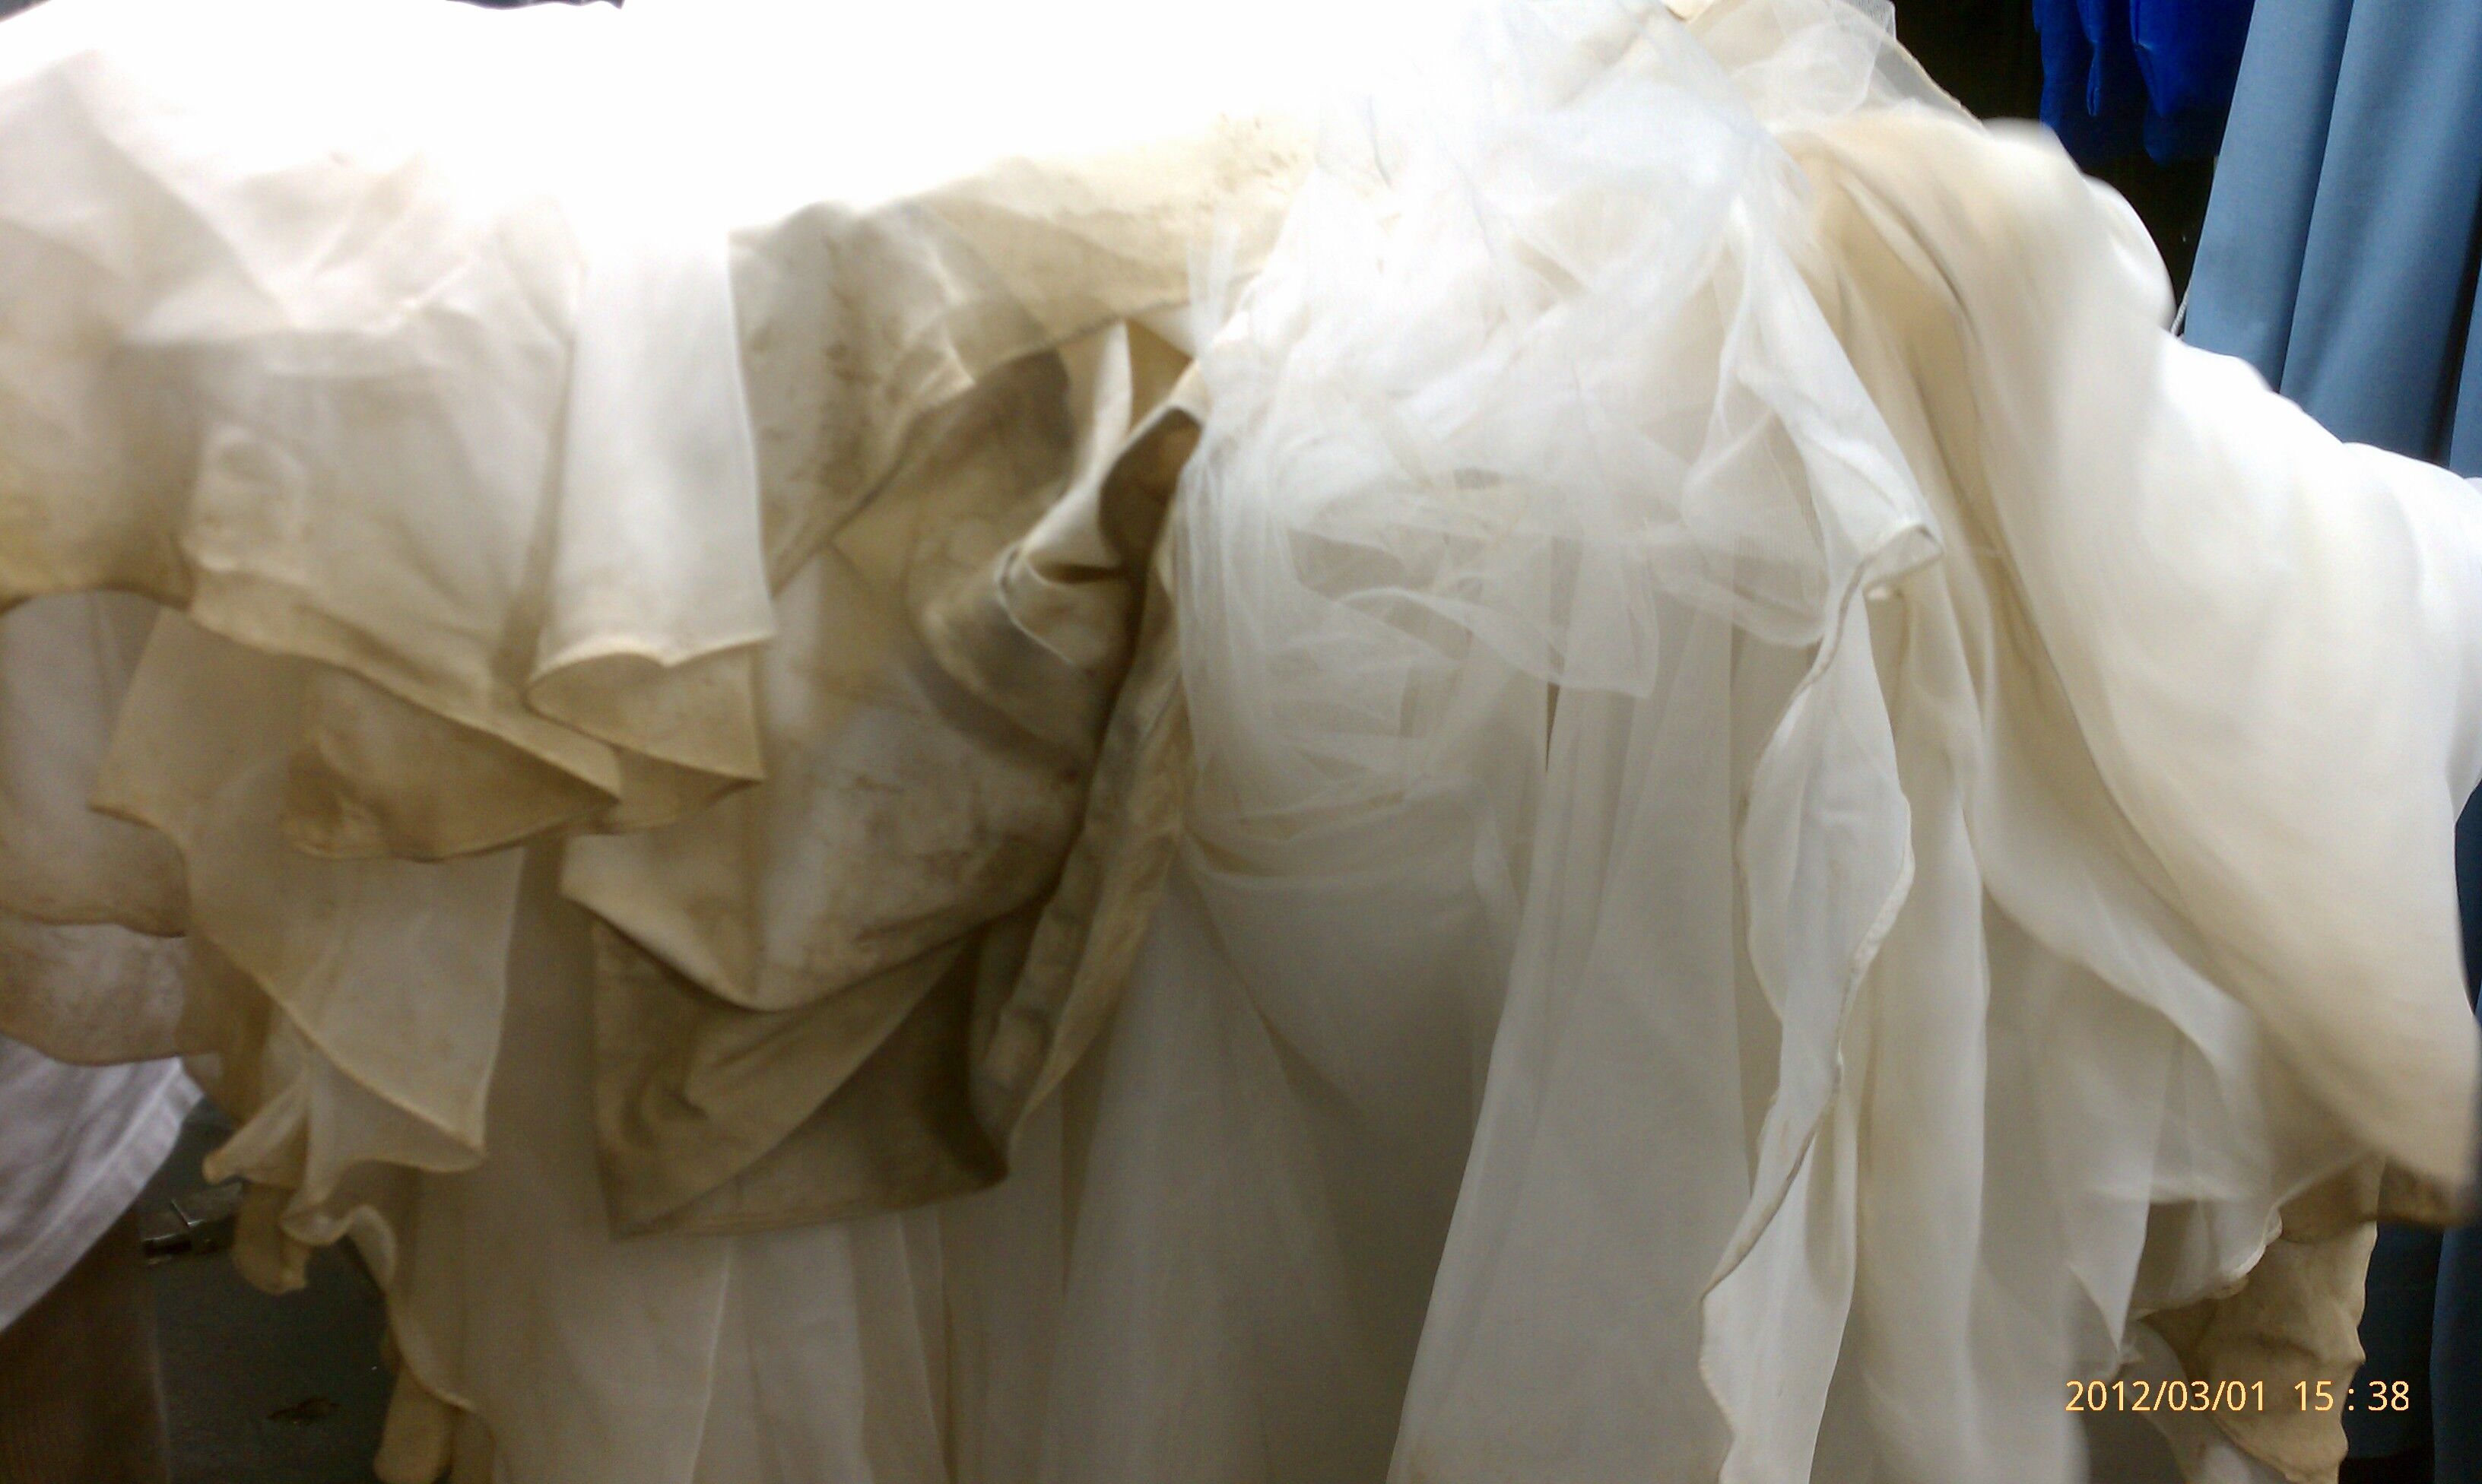 Wedding Dress Cleaning Near Me, Wedding Gown Dry Cleaning NYC